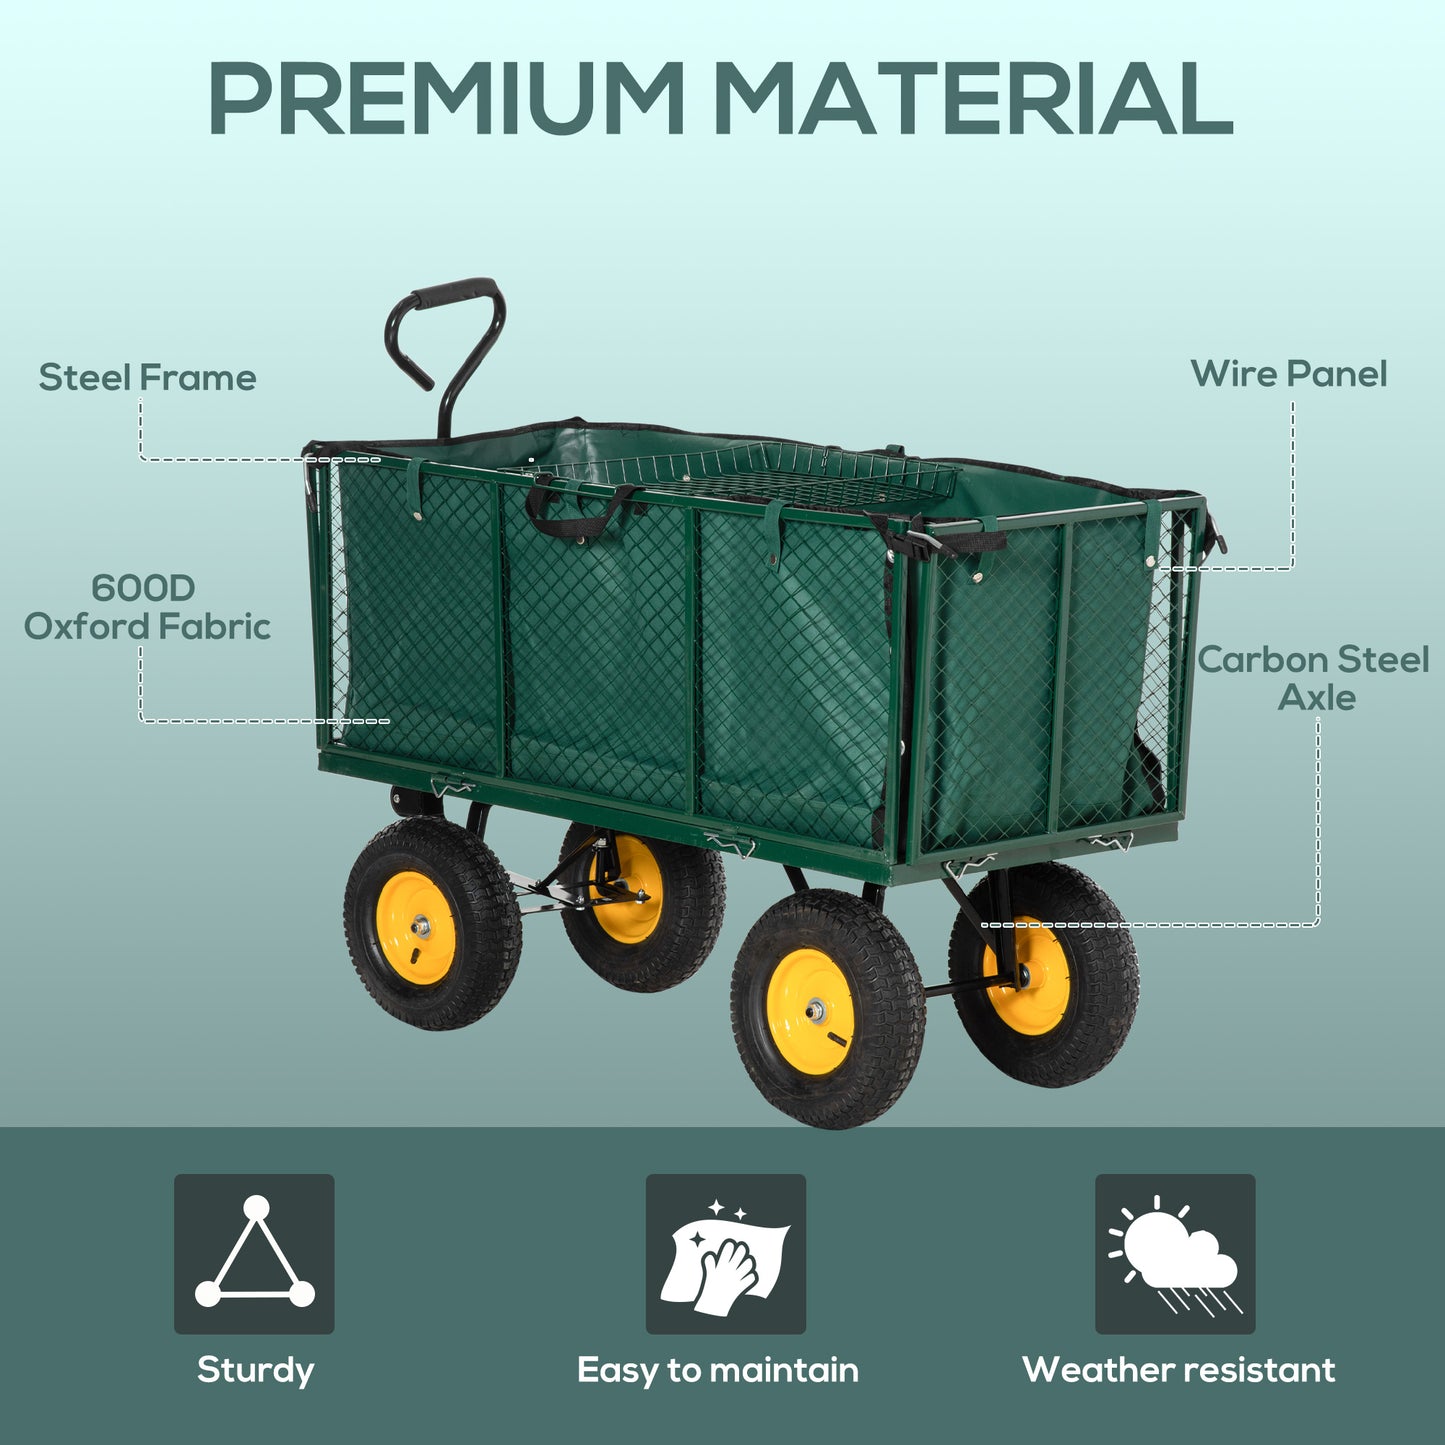 Outsunny Heavy Duty Garden Trolley with 4 Wheels, Metal Frame, and Pull Handle, Ideal for Gardening Tasks, Green